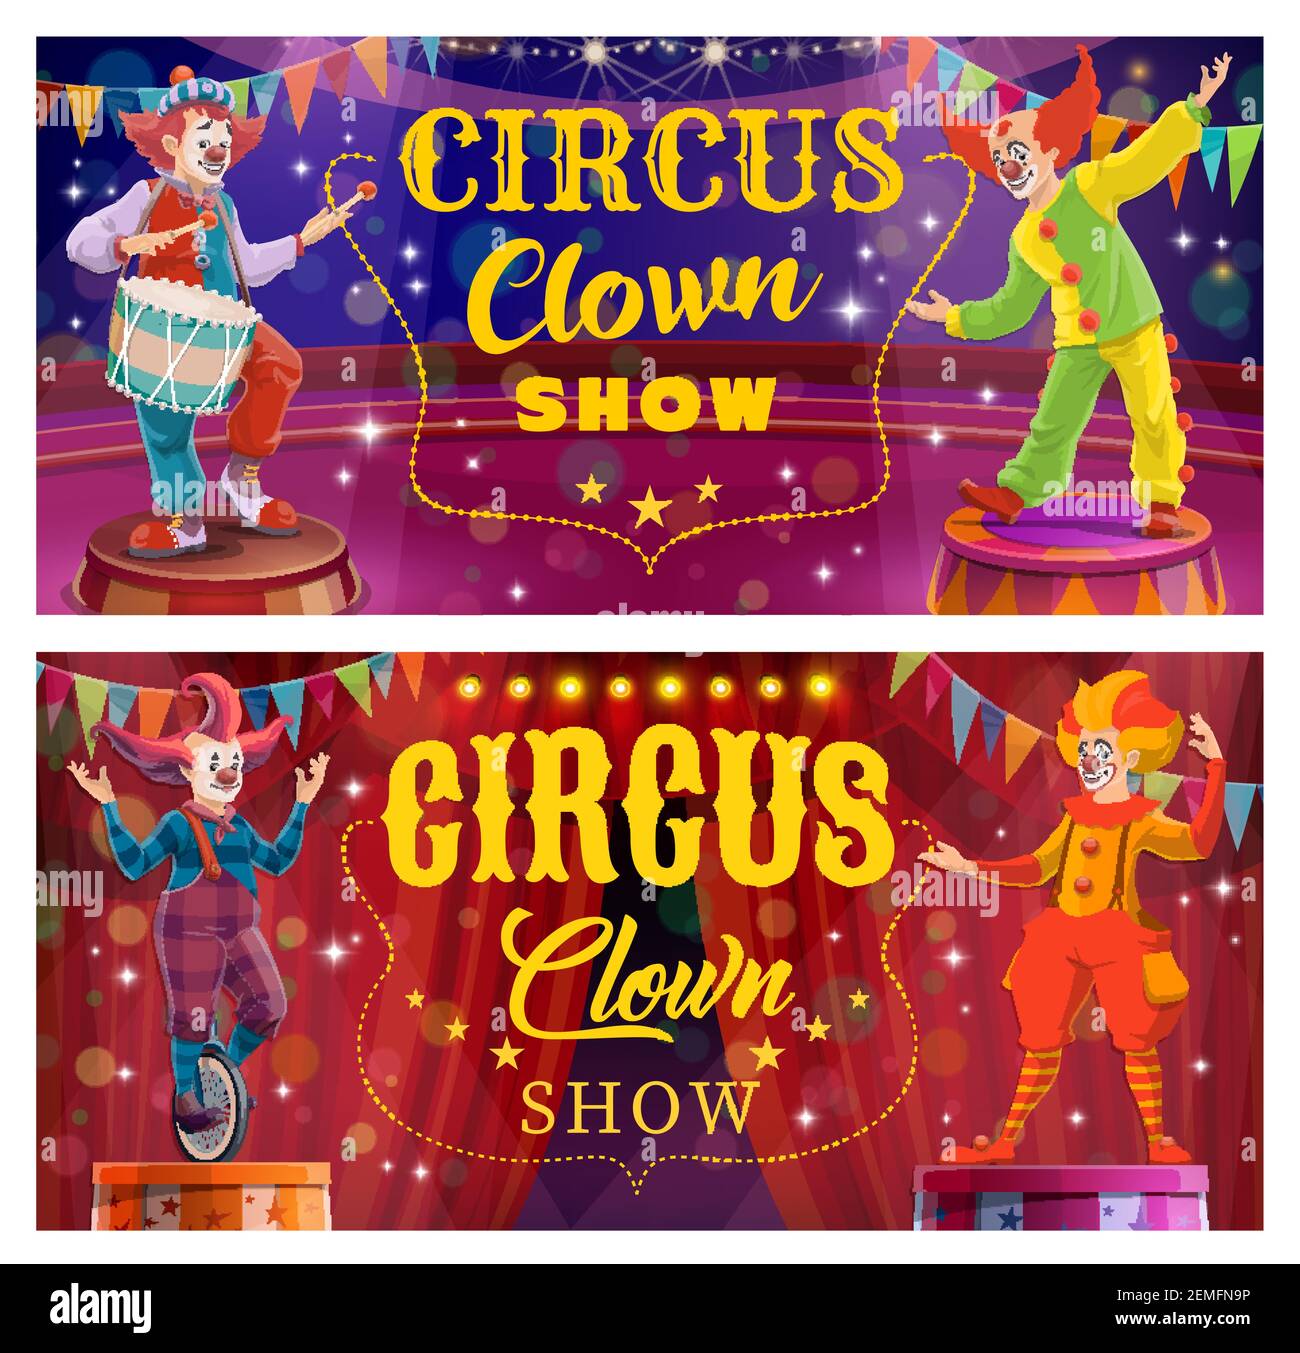 Chapiteau circus clown entertainment show. Whiteface clowns characters with false nose, bizarre hairdo and colorful costume, playing on drum, rides un Stock Vector